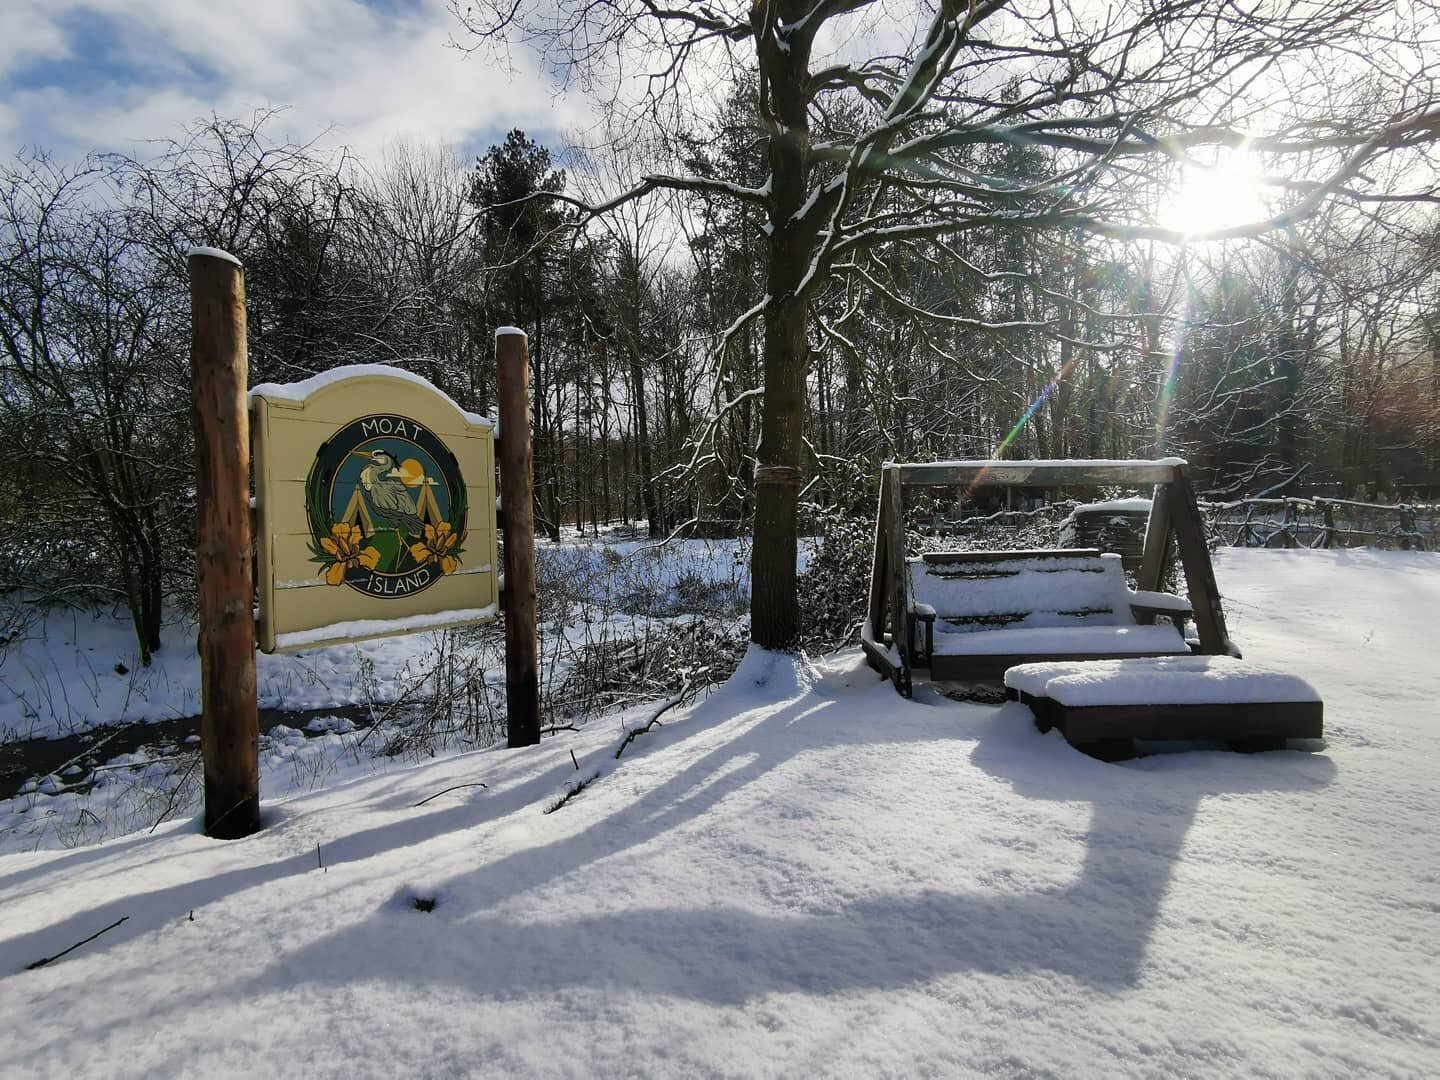 What a great day it has been already 😁 Loving the snow! We hope you are all enjoying it too ❤️🌨️❄️🌨️❄️🌨️❤️
.
.
.
#glamping #norfolk #norwich #moatisland #wildswimming #snowplacelikehome #beastfromtheeast